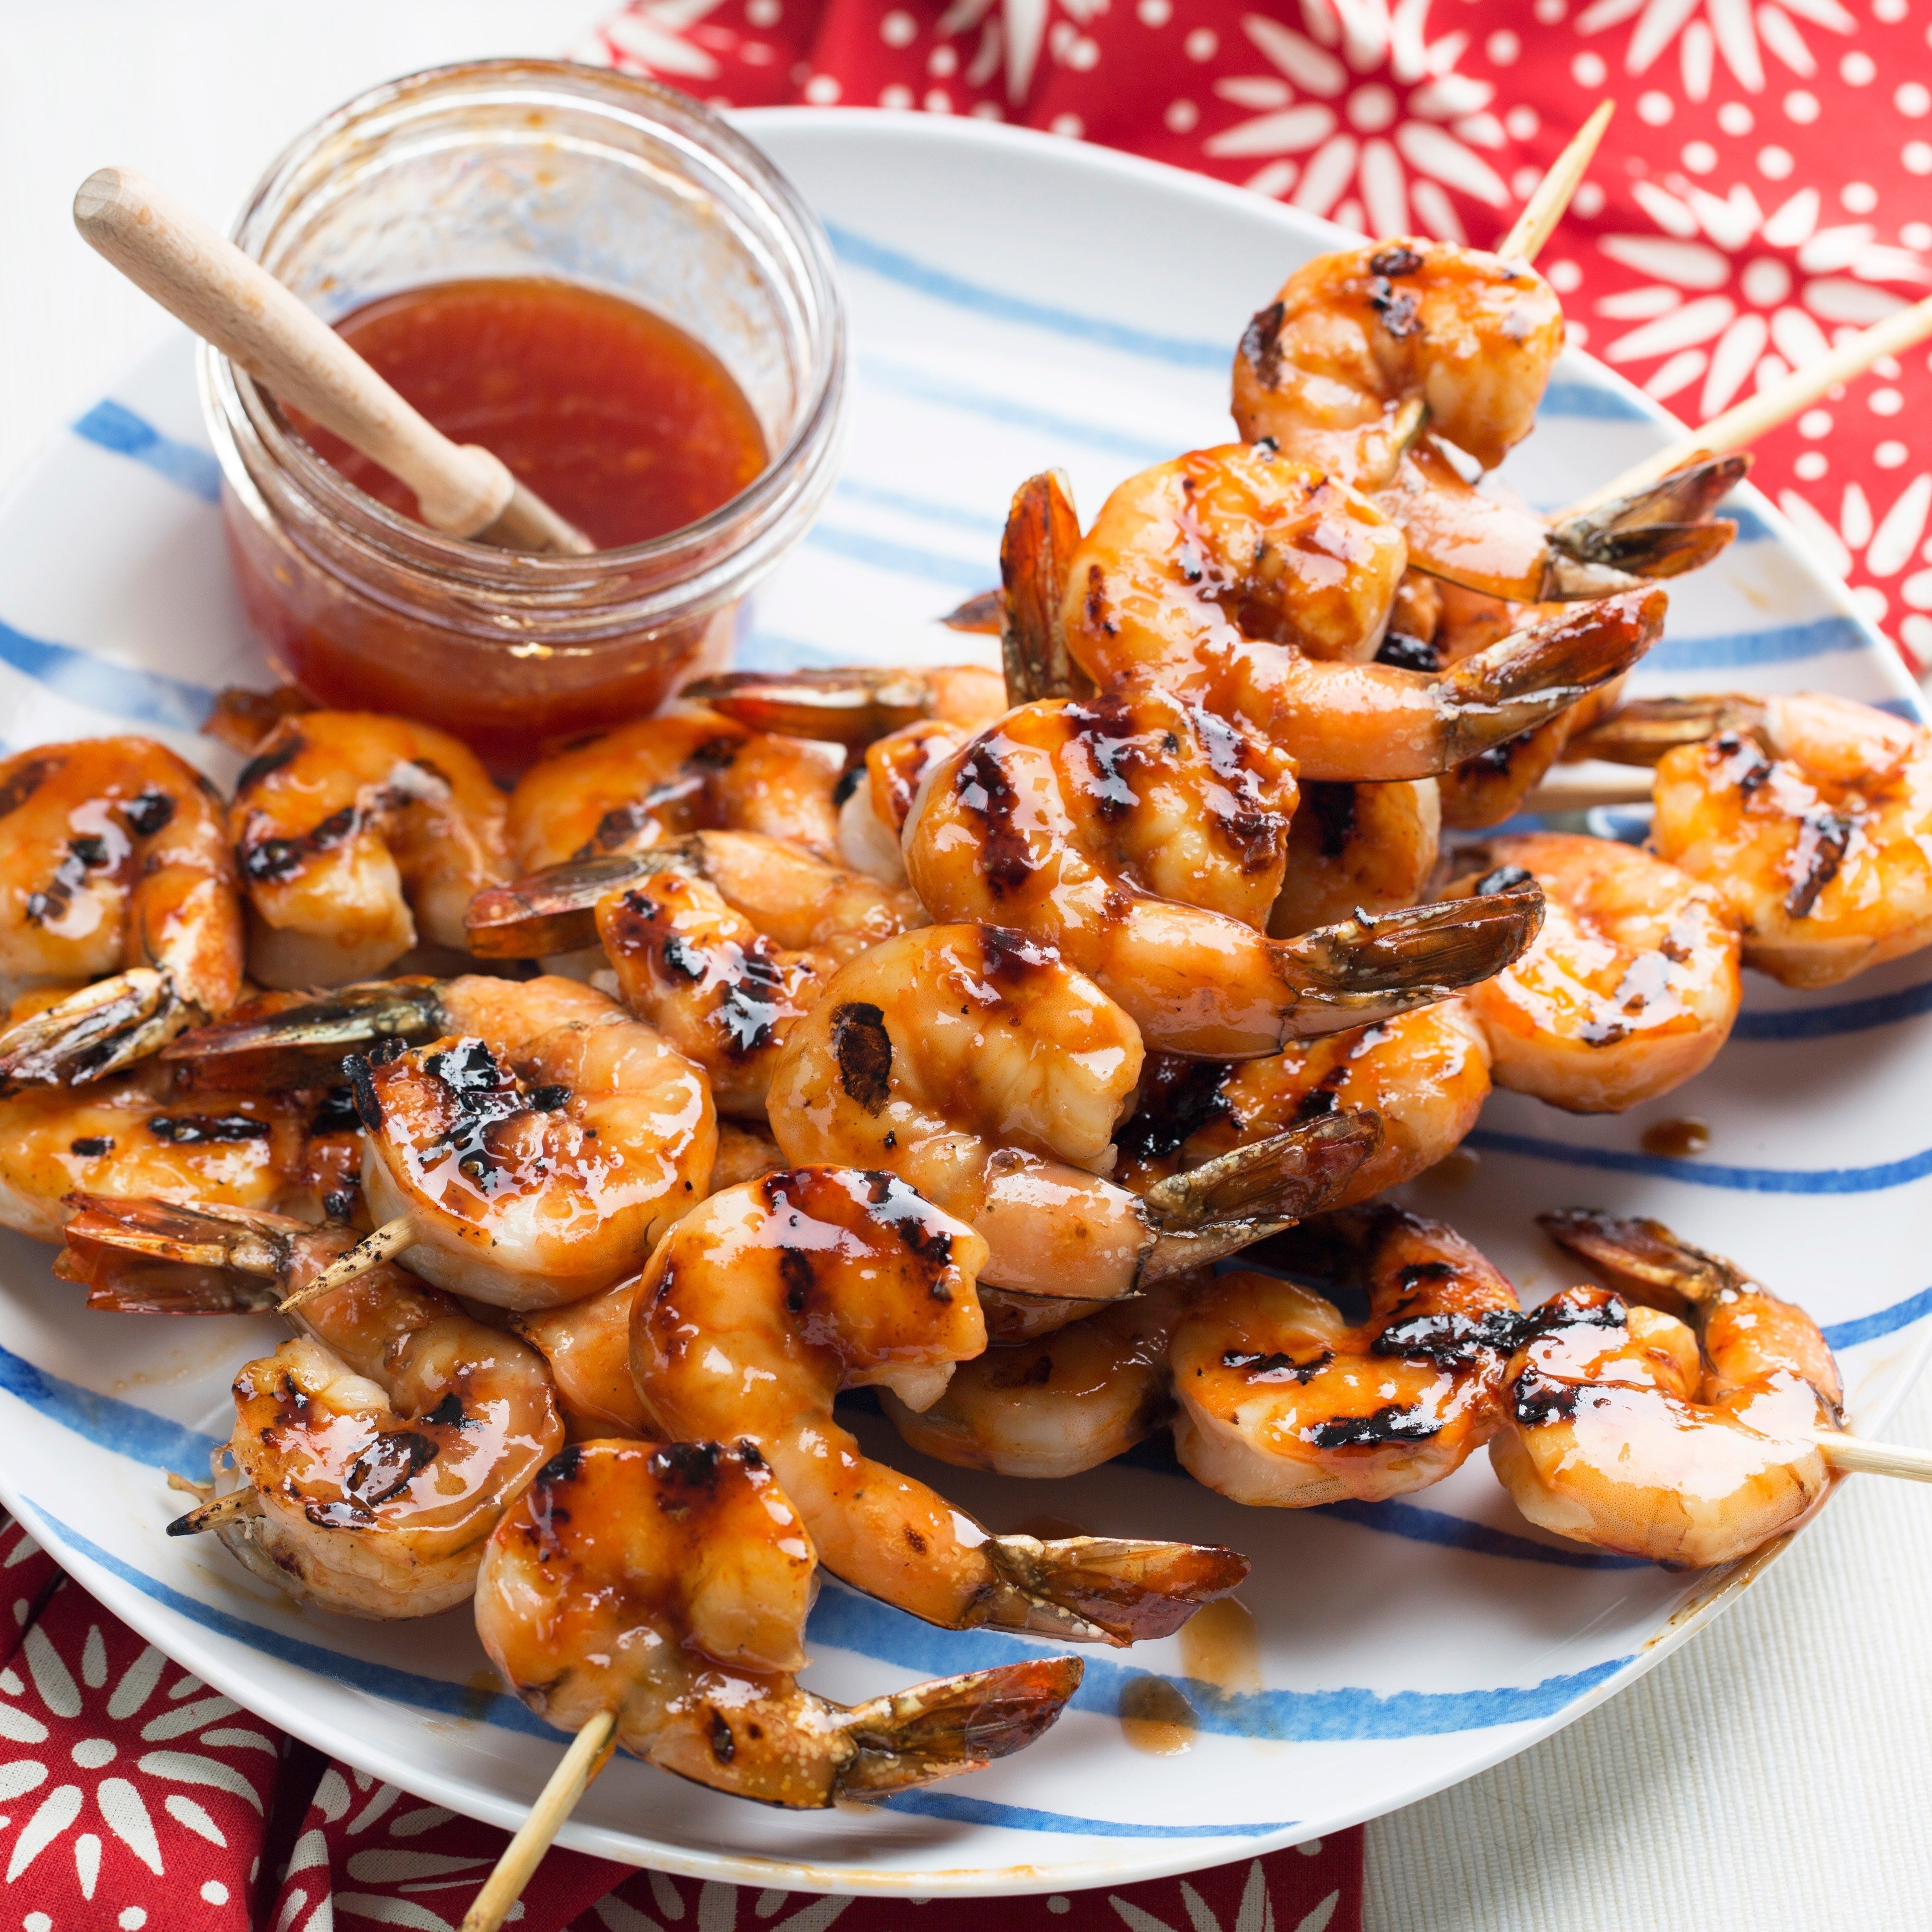 10 Awesome Bbq Ideas For A Crowd grilled shrimp with honey ginger barbecue sauce recipe epicurious 1 2022